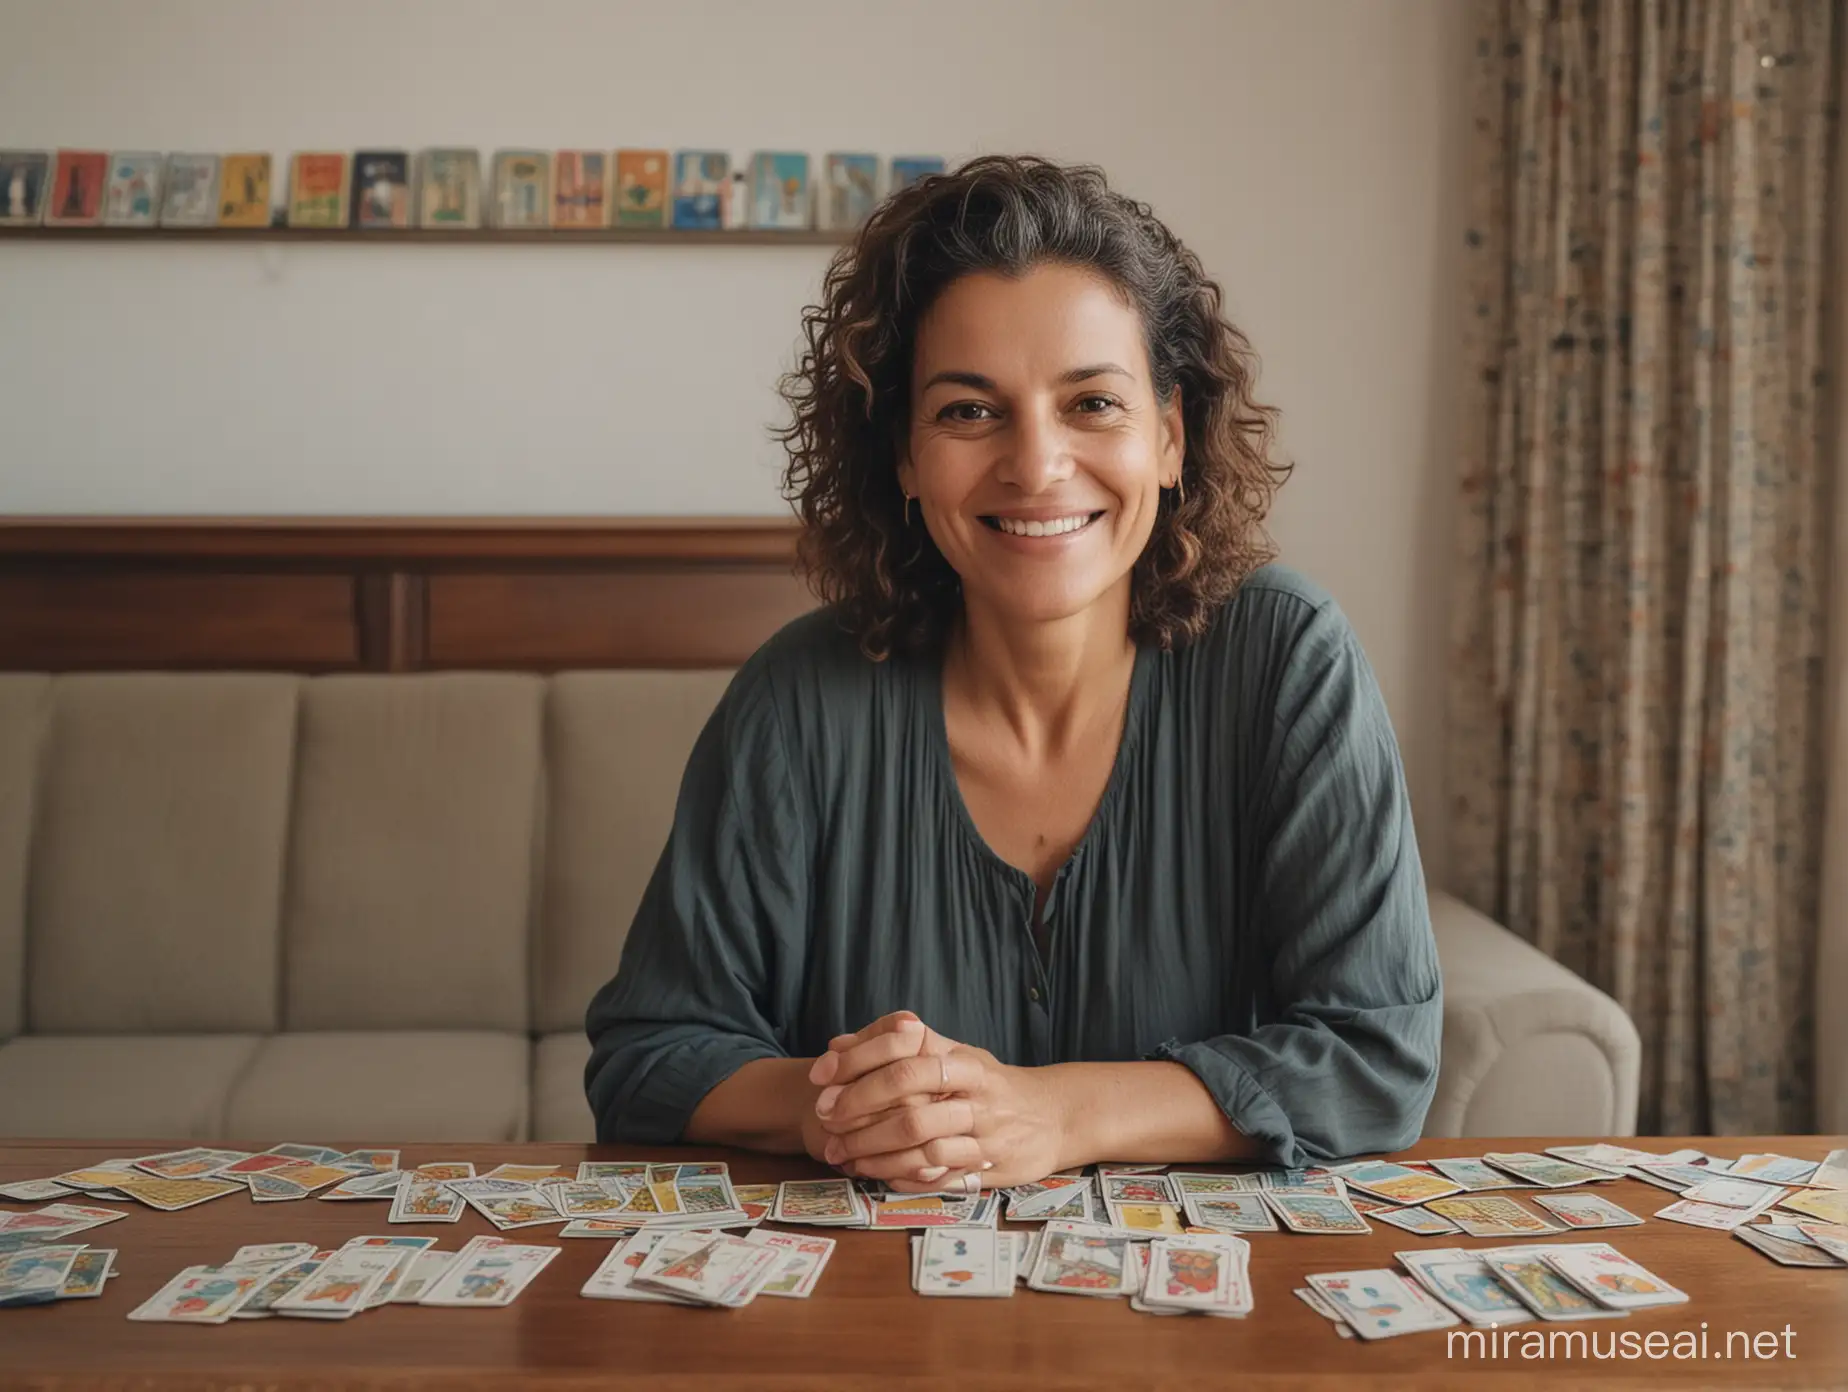 Smiling Brazilian Woman with Tarot Cards in Modest Living Room